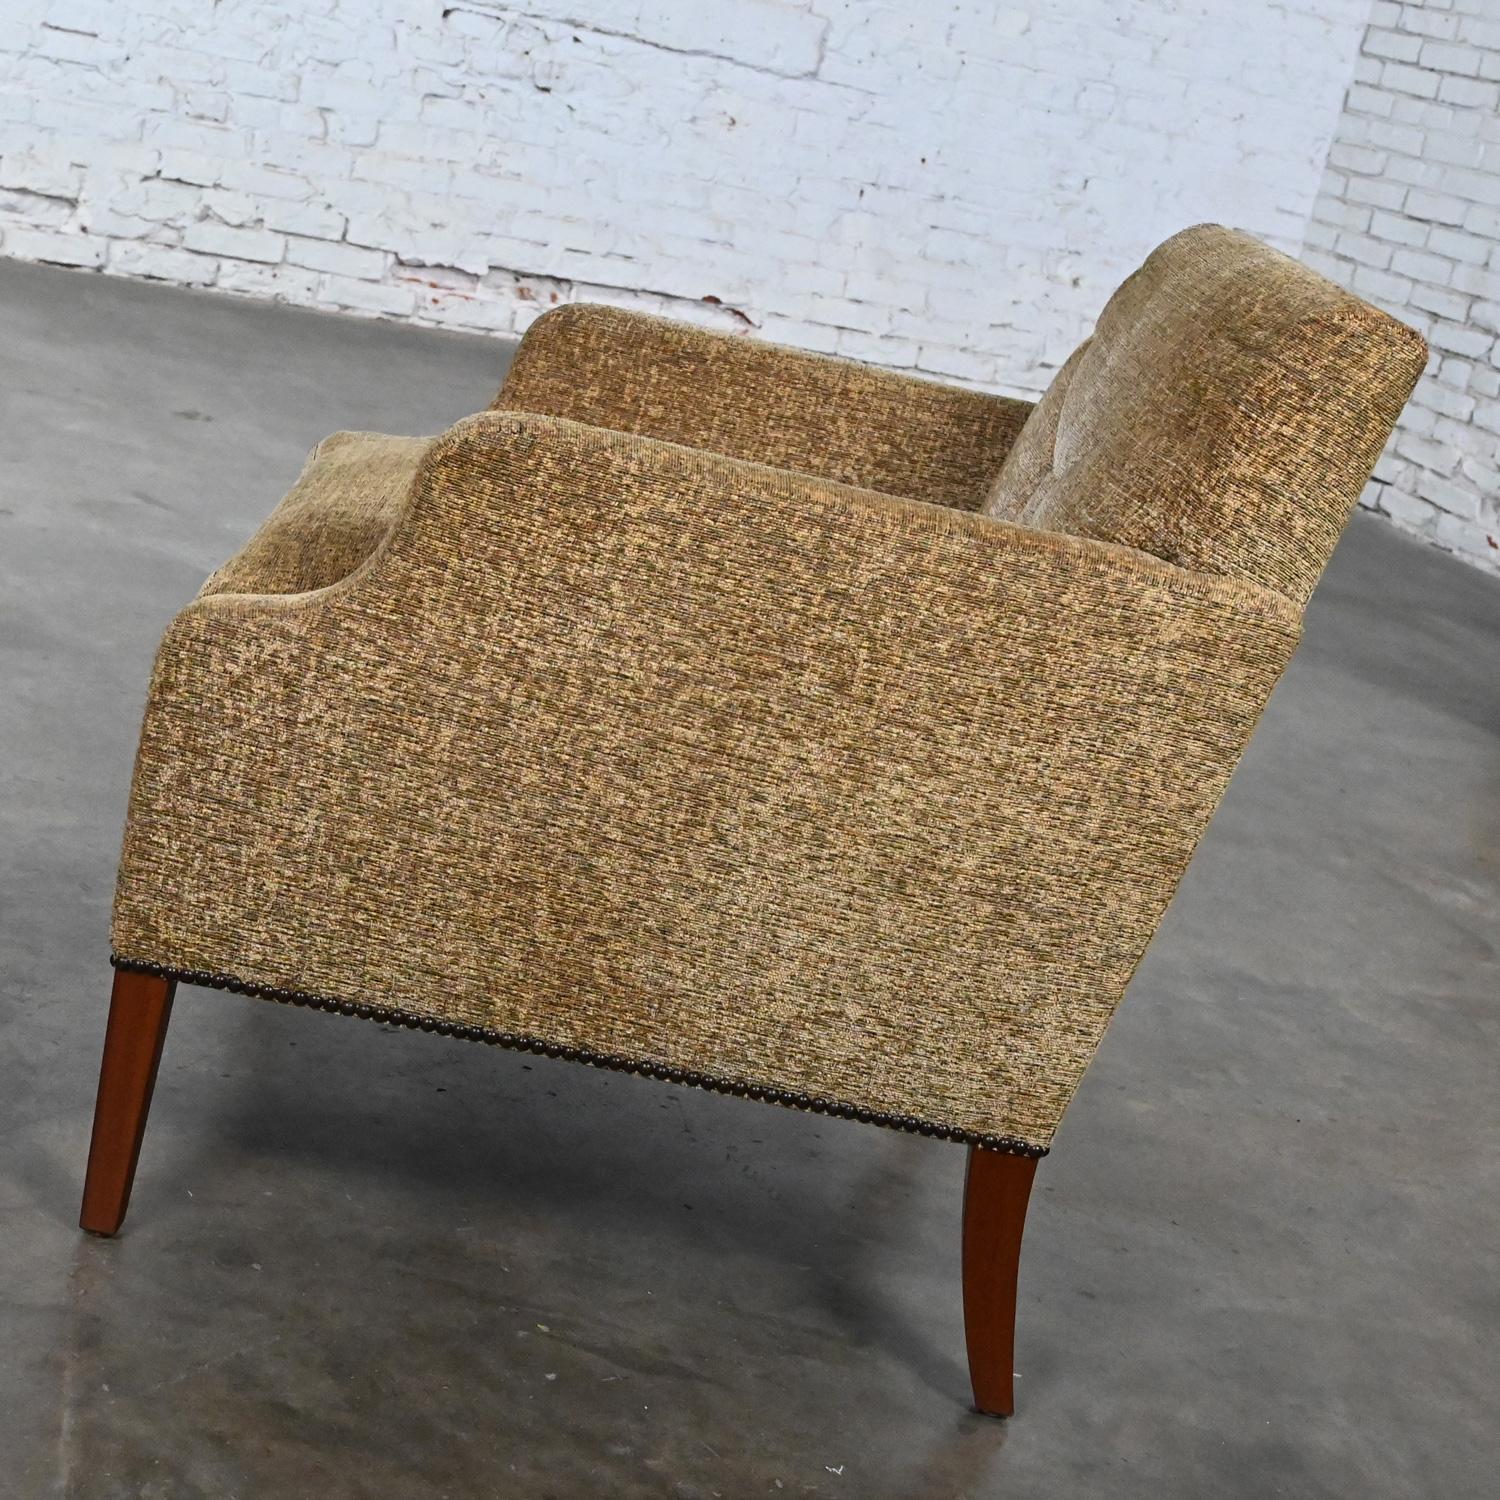 Late 20th - Early 21st Century Modern Khaki Accent Lounge Chair Down Seat In Good Condition For Sale In Topeka, KS